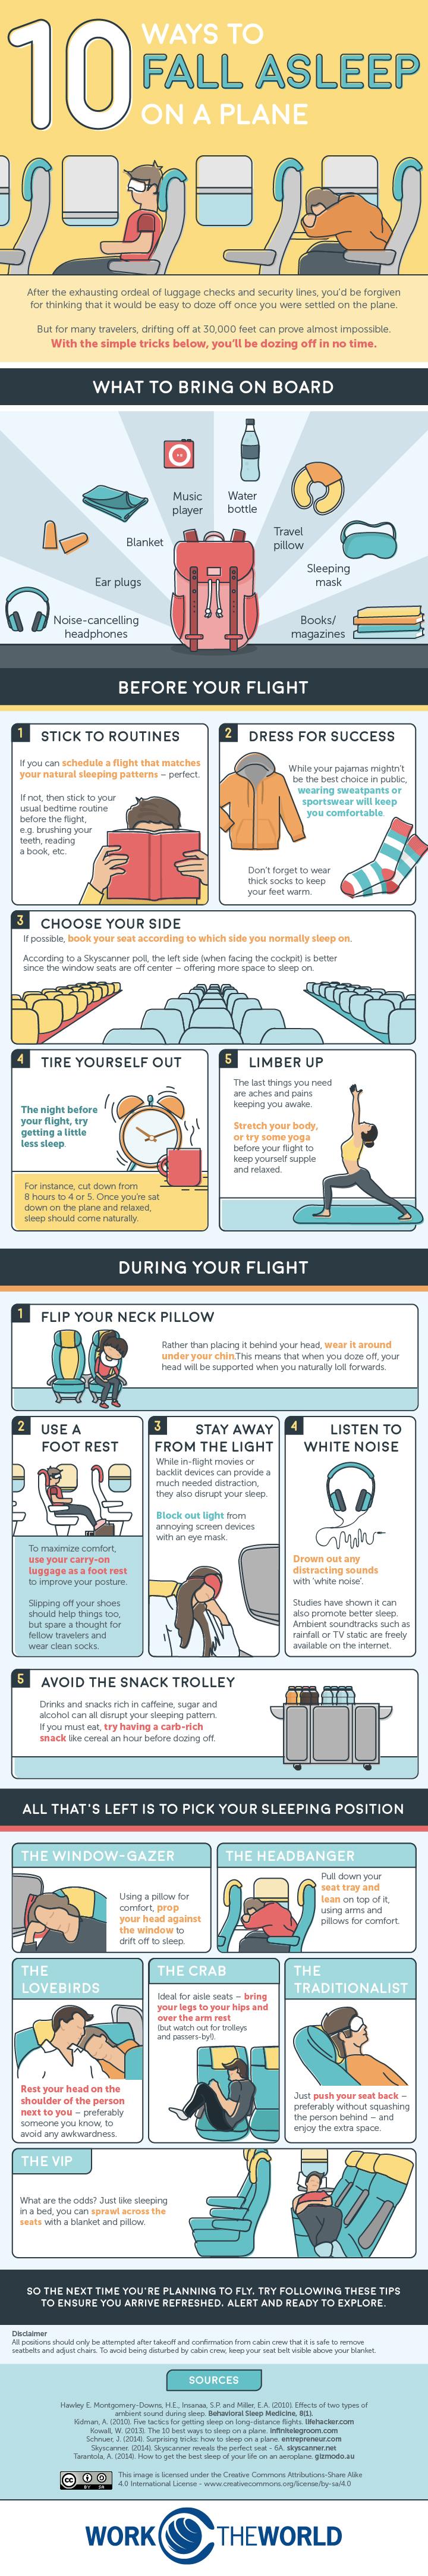 10-ways-to-fall-asleep-on-a-plane-v3-infographic